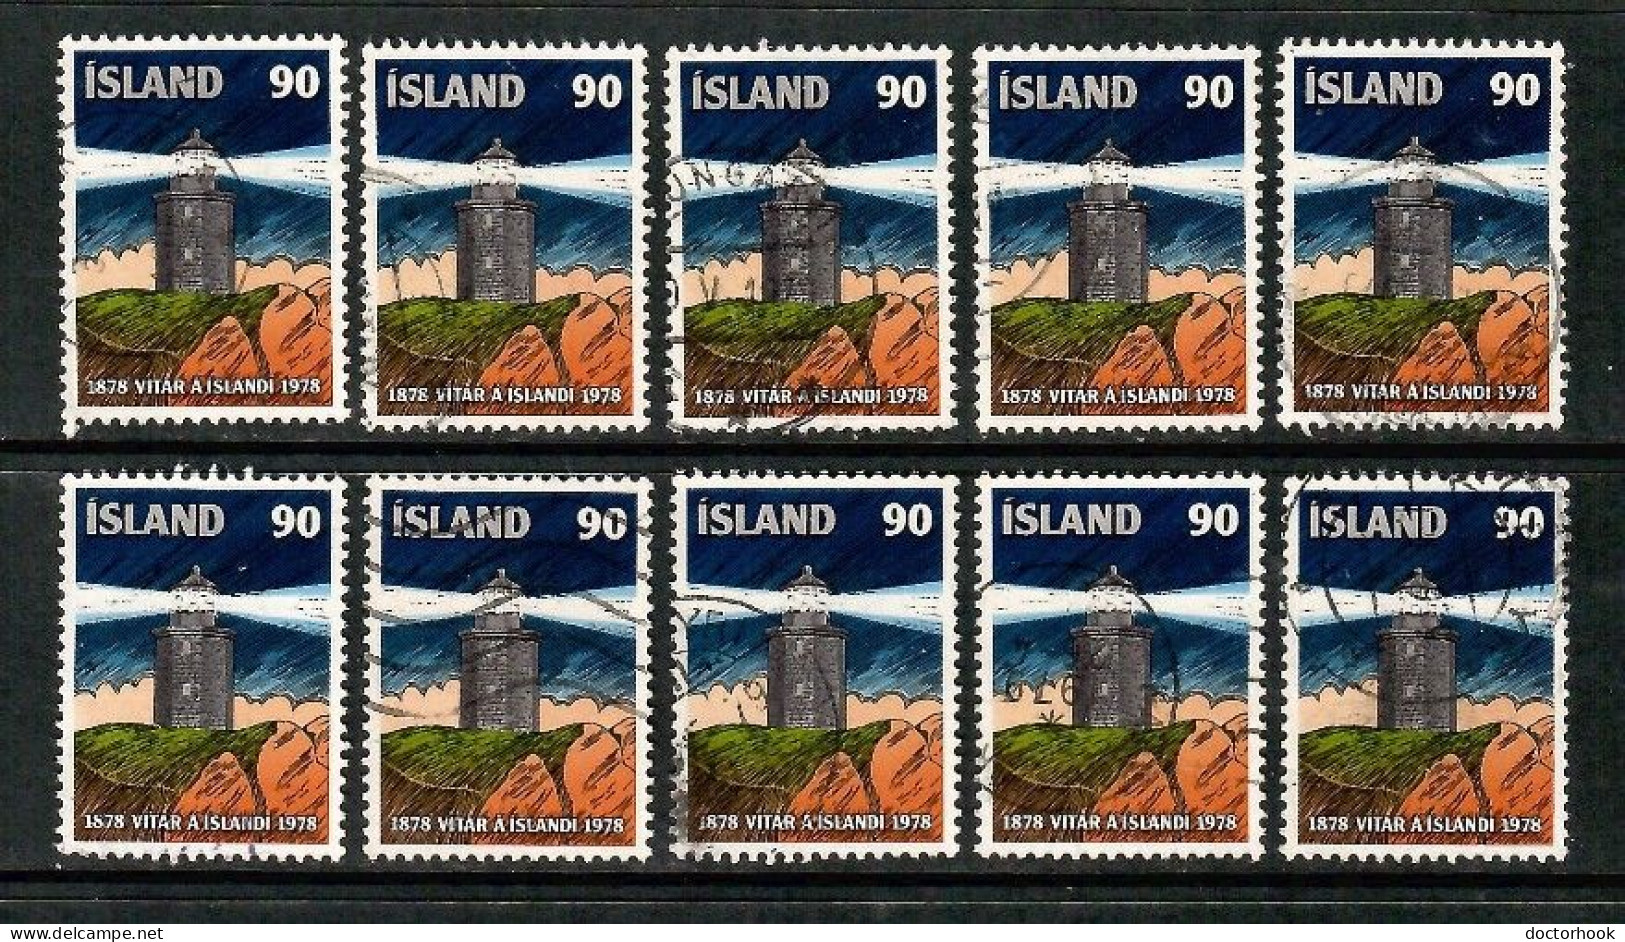 ICELAND   Scott # 574 USED WHOLESALE LOT OF 10 (CONDITION AS PER SCAN) (WH-626) - Collections, Lots & Séries